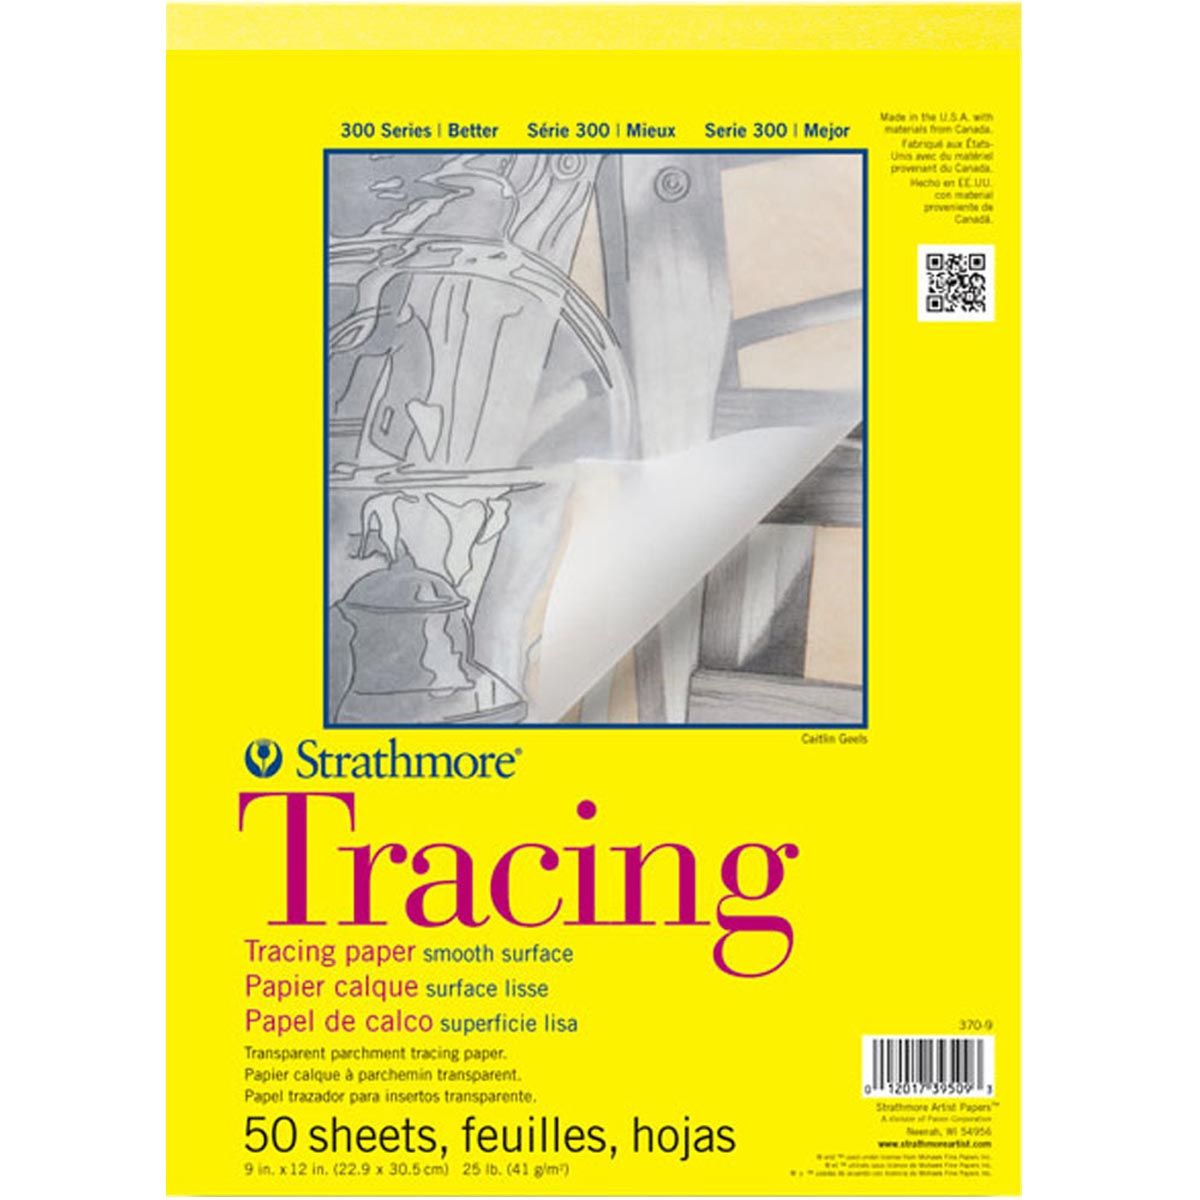 Strathmore 300 Series Tracing Paper Pad 50 Sheets 9"x 12"